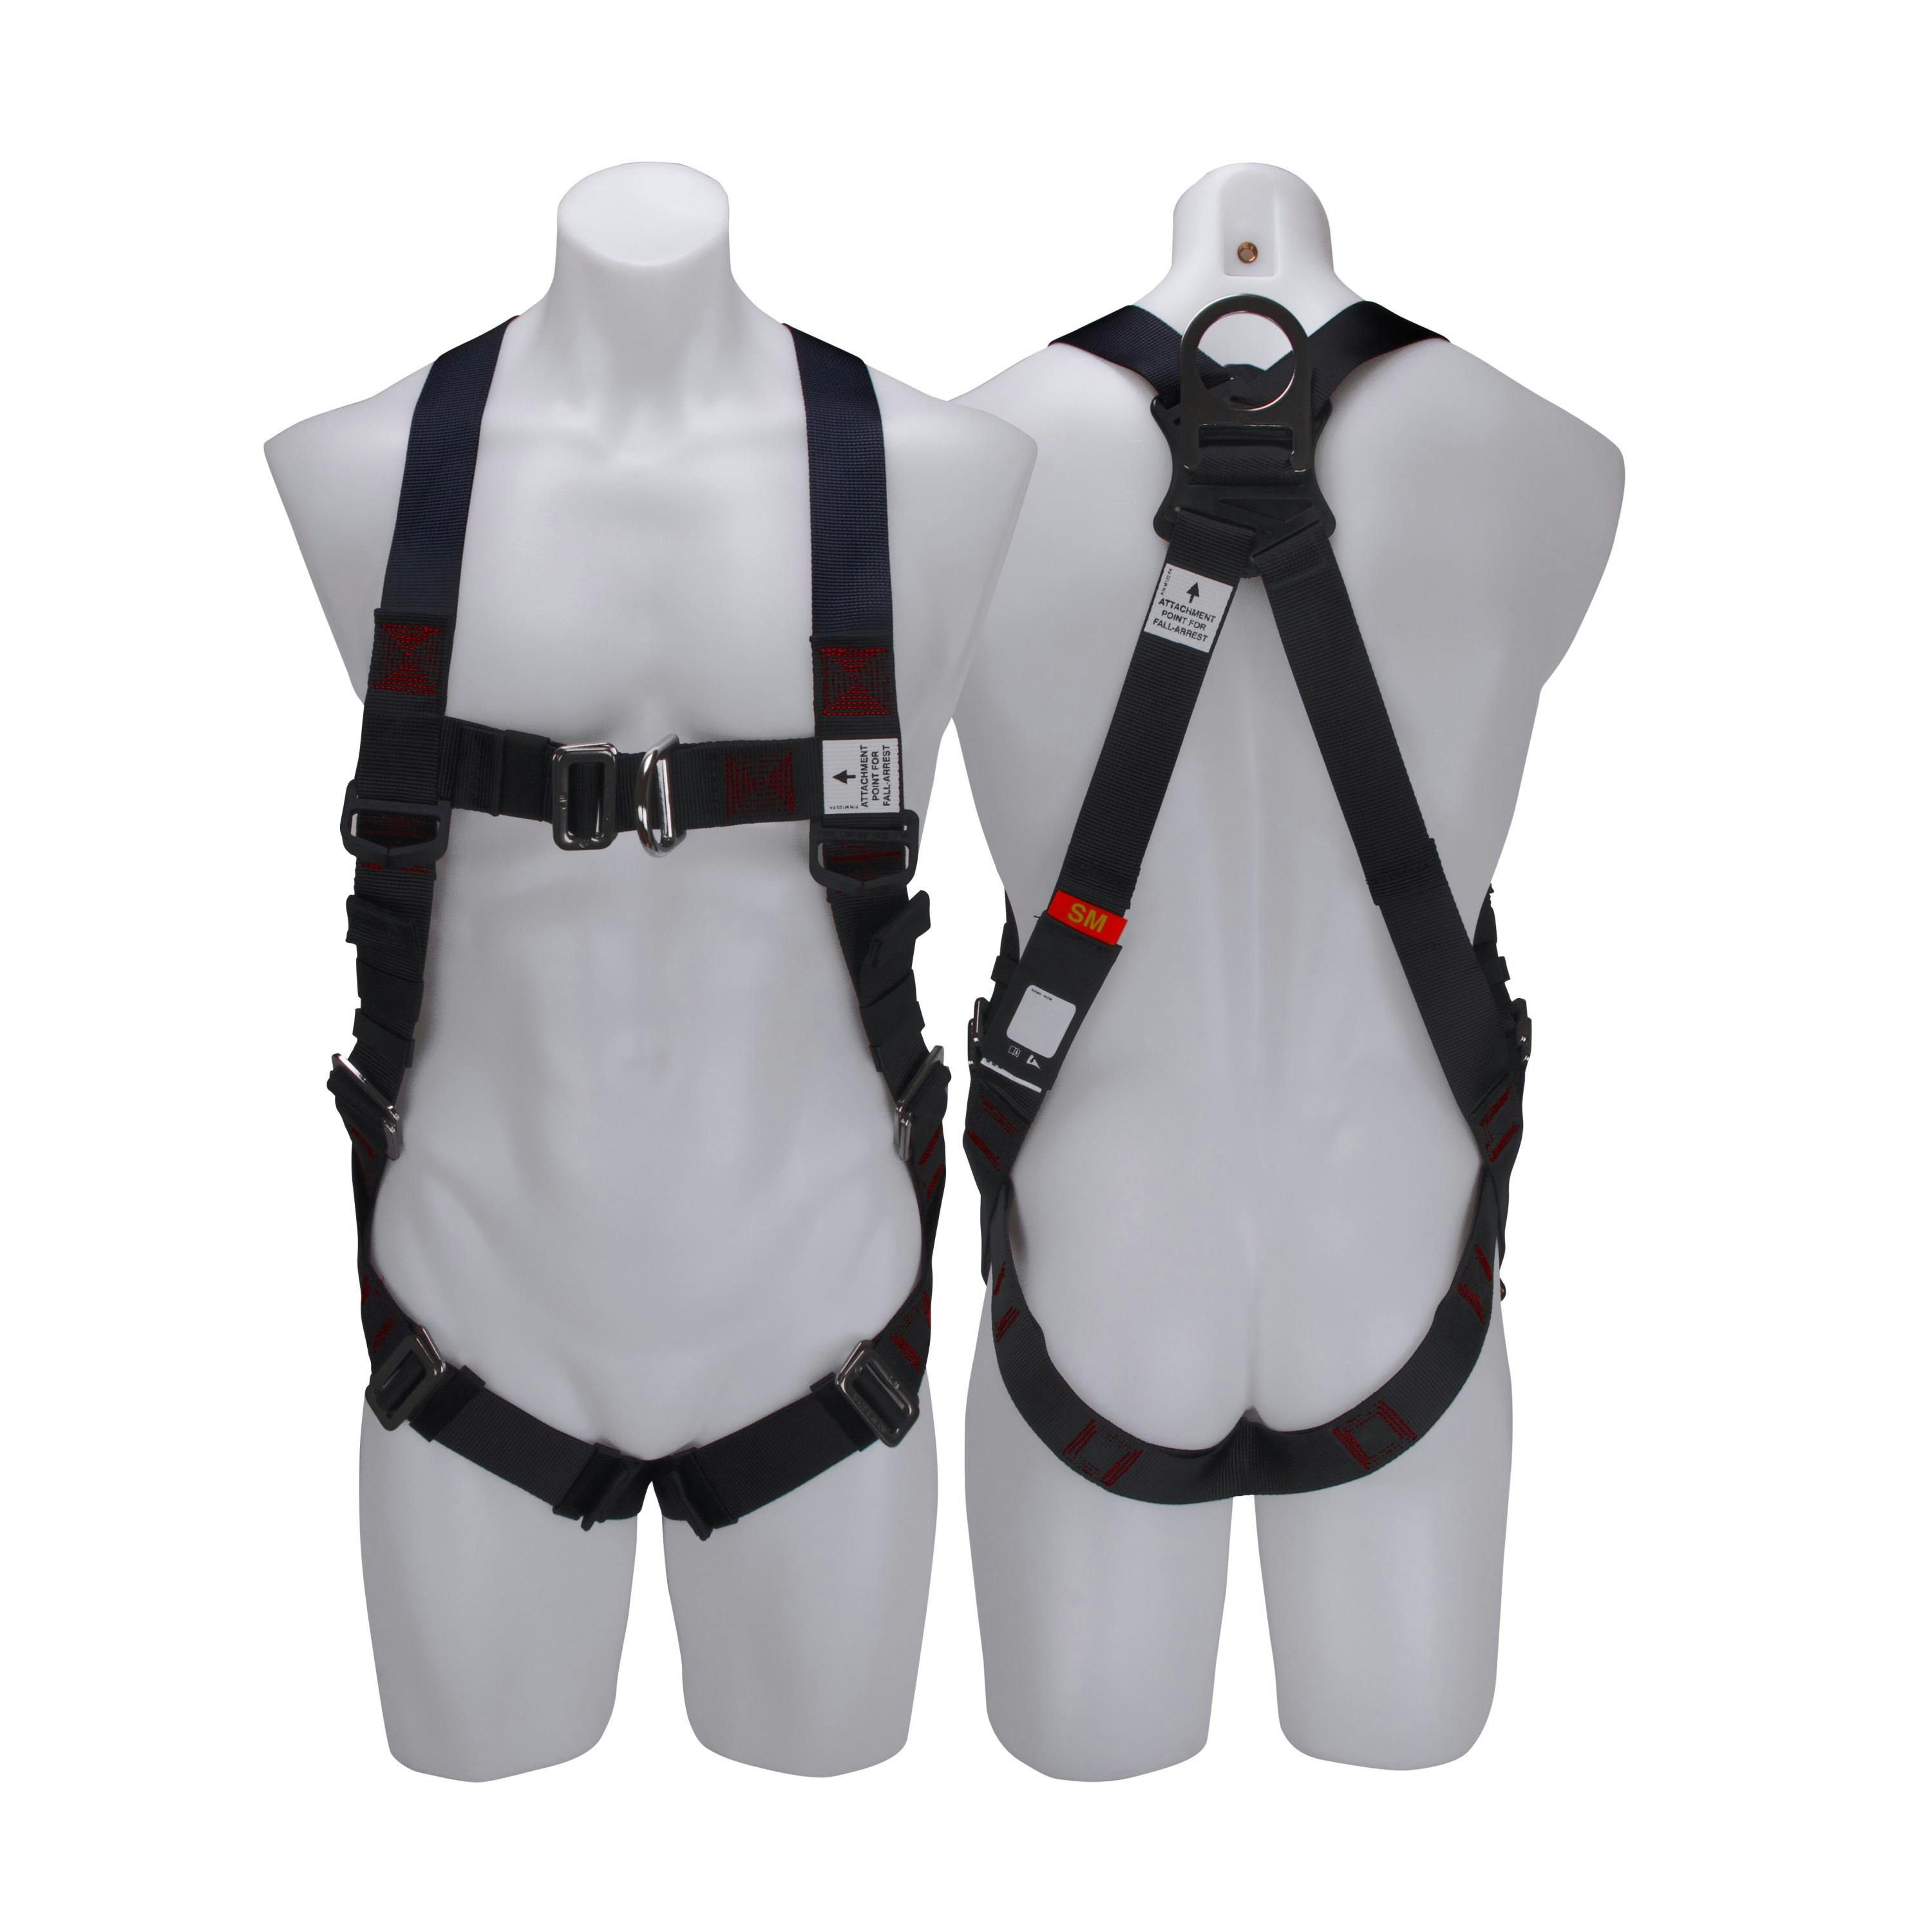 3M™ PROTECTA® X Riggers Harness with Stainless Steel and Pass Through Buckles 1161661, Red and Black, Medium, 1 EA/Case